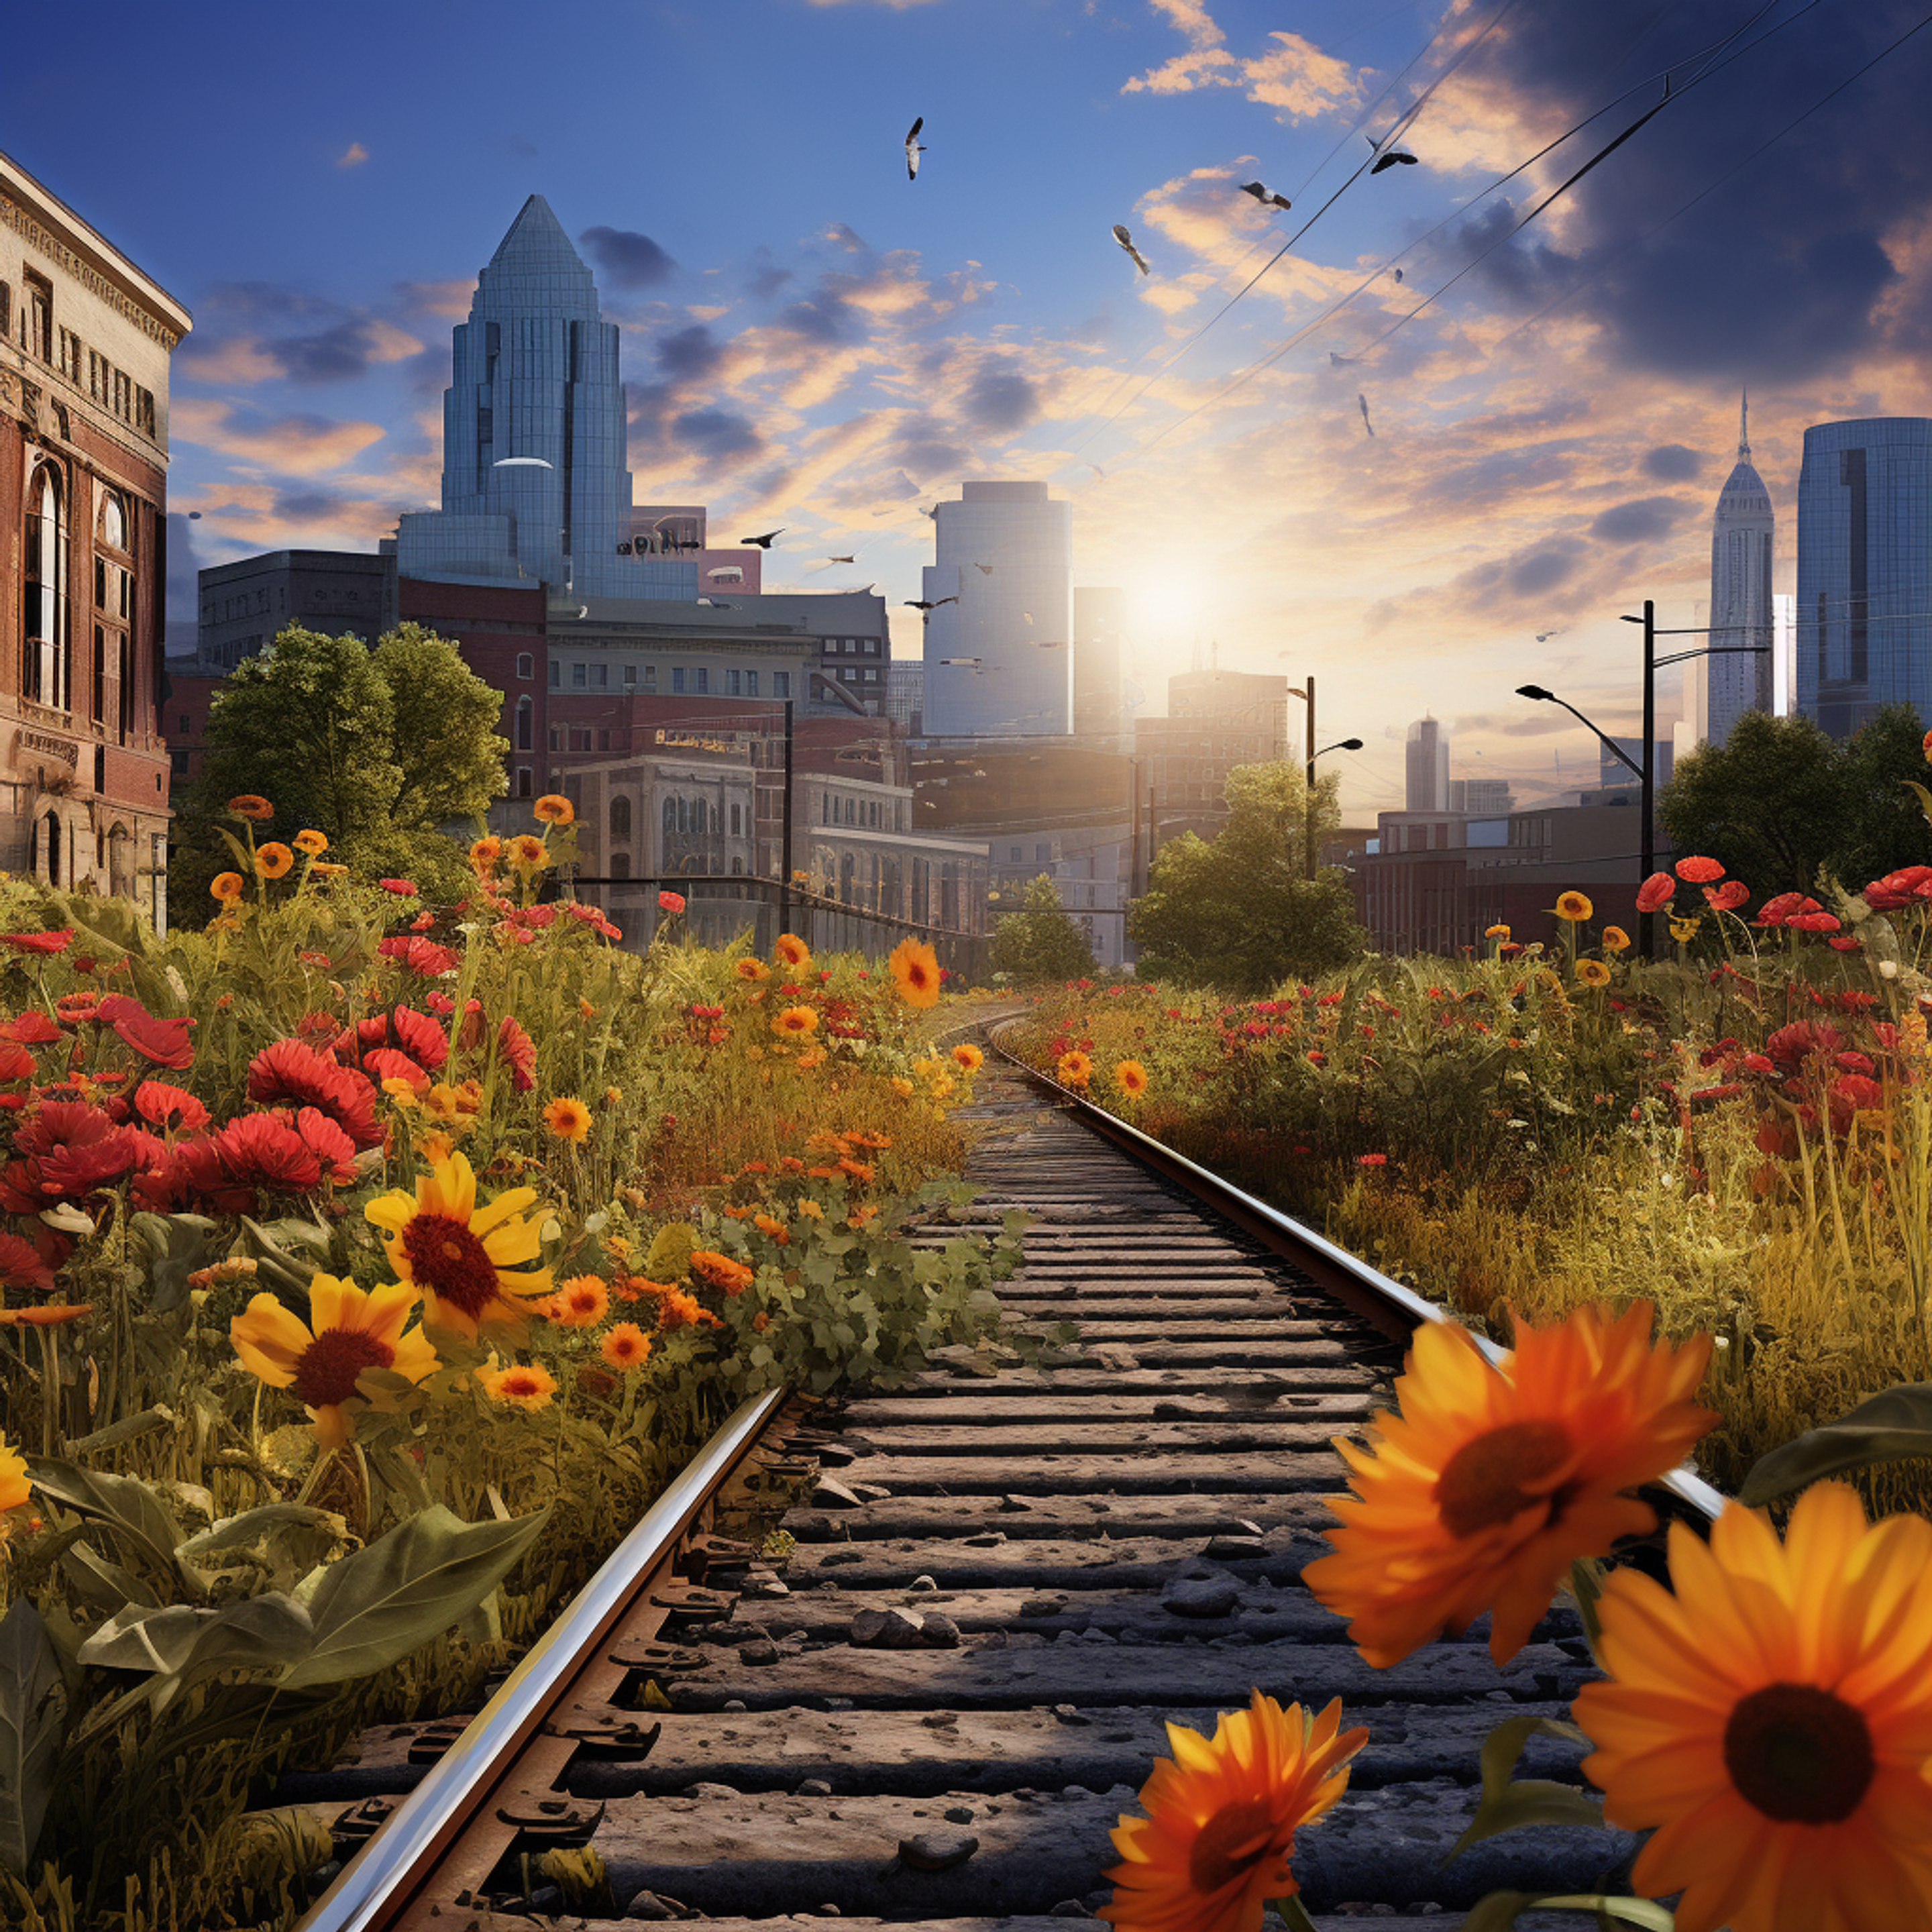 A railway through Kansas City lined with bright sunflowers and zinnias leading to the downtown skyline at sunrise, evoking a route for flower delivery in Kansas City.